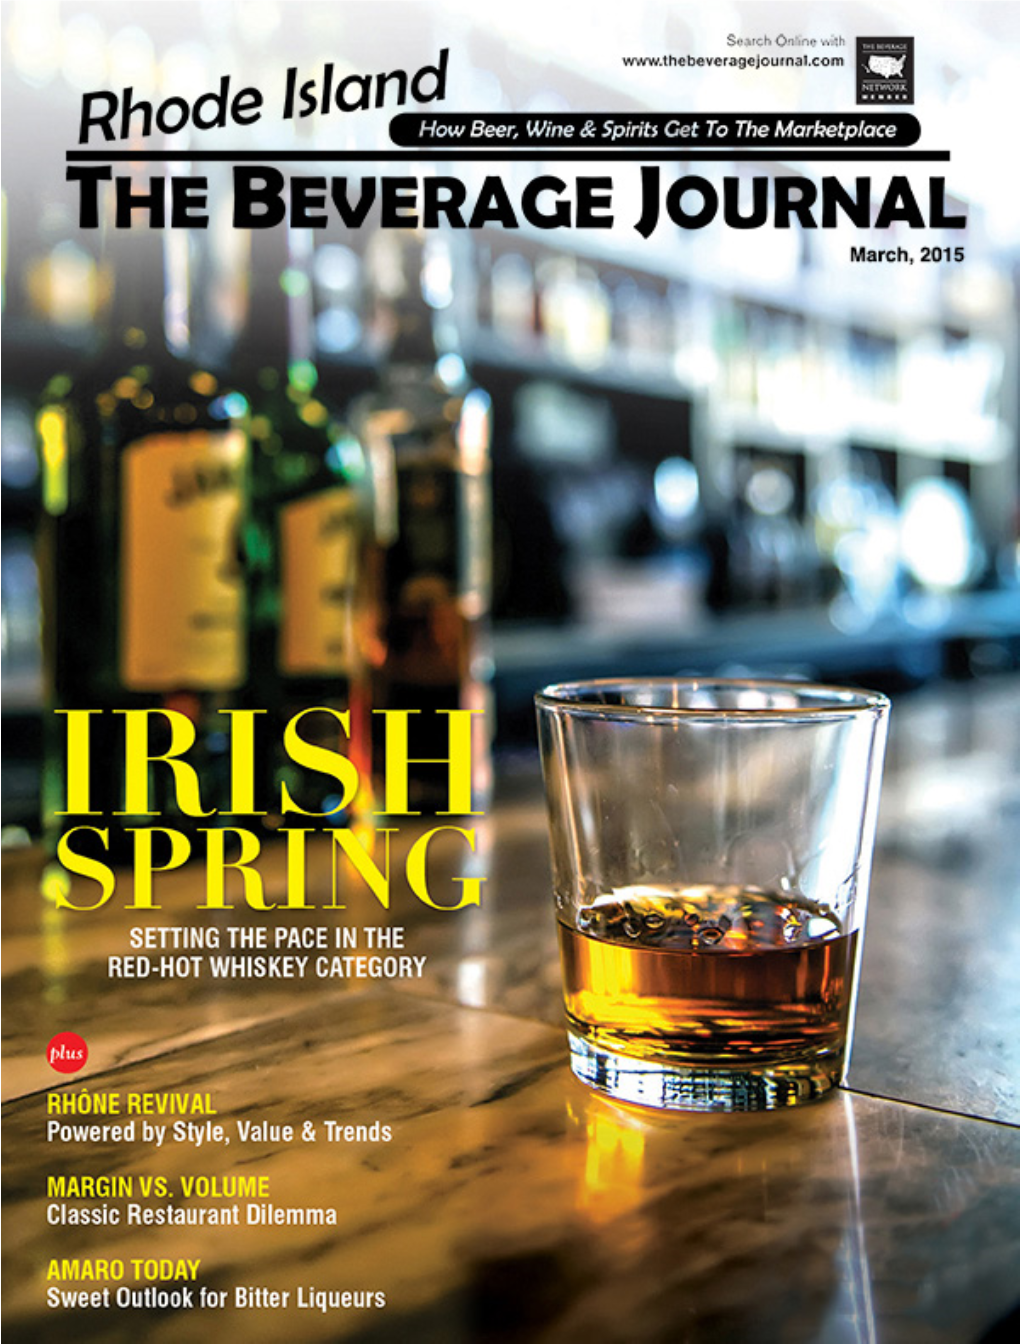 The Wind Continues to Be at Irish Whiskey's Back